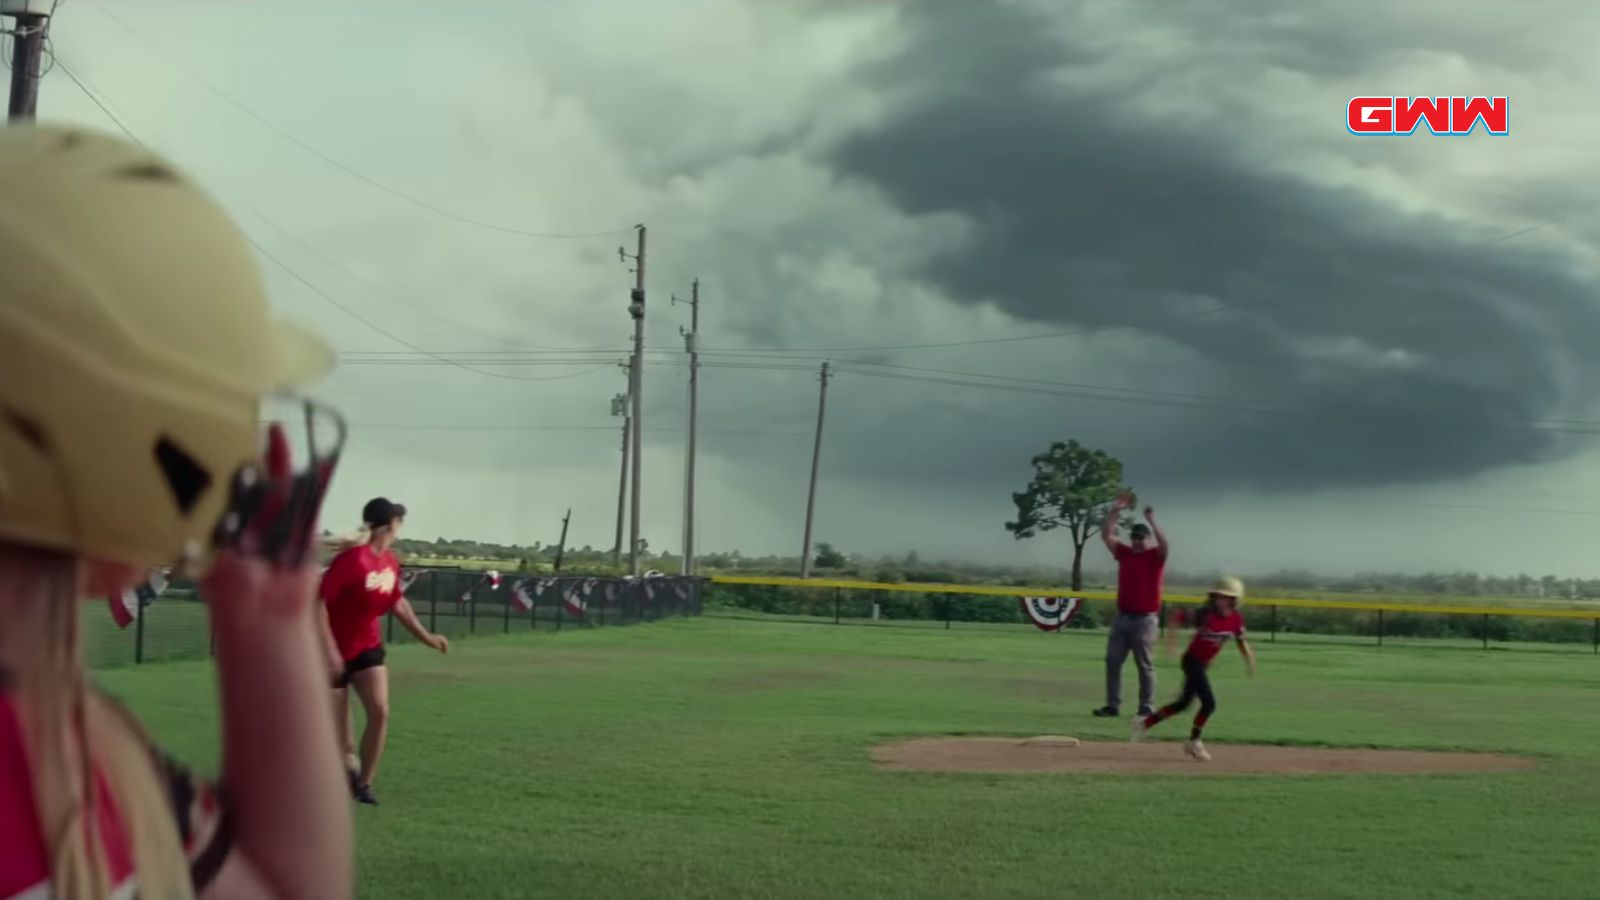 An baseball game interrupted by a tornado, Twisters movie